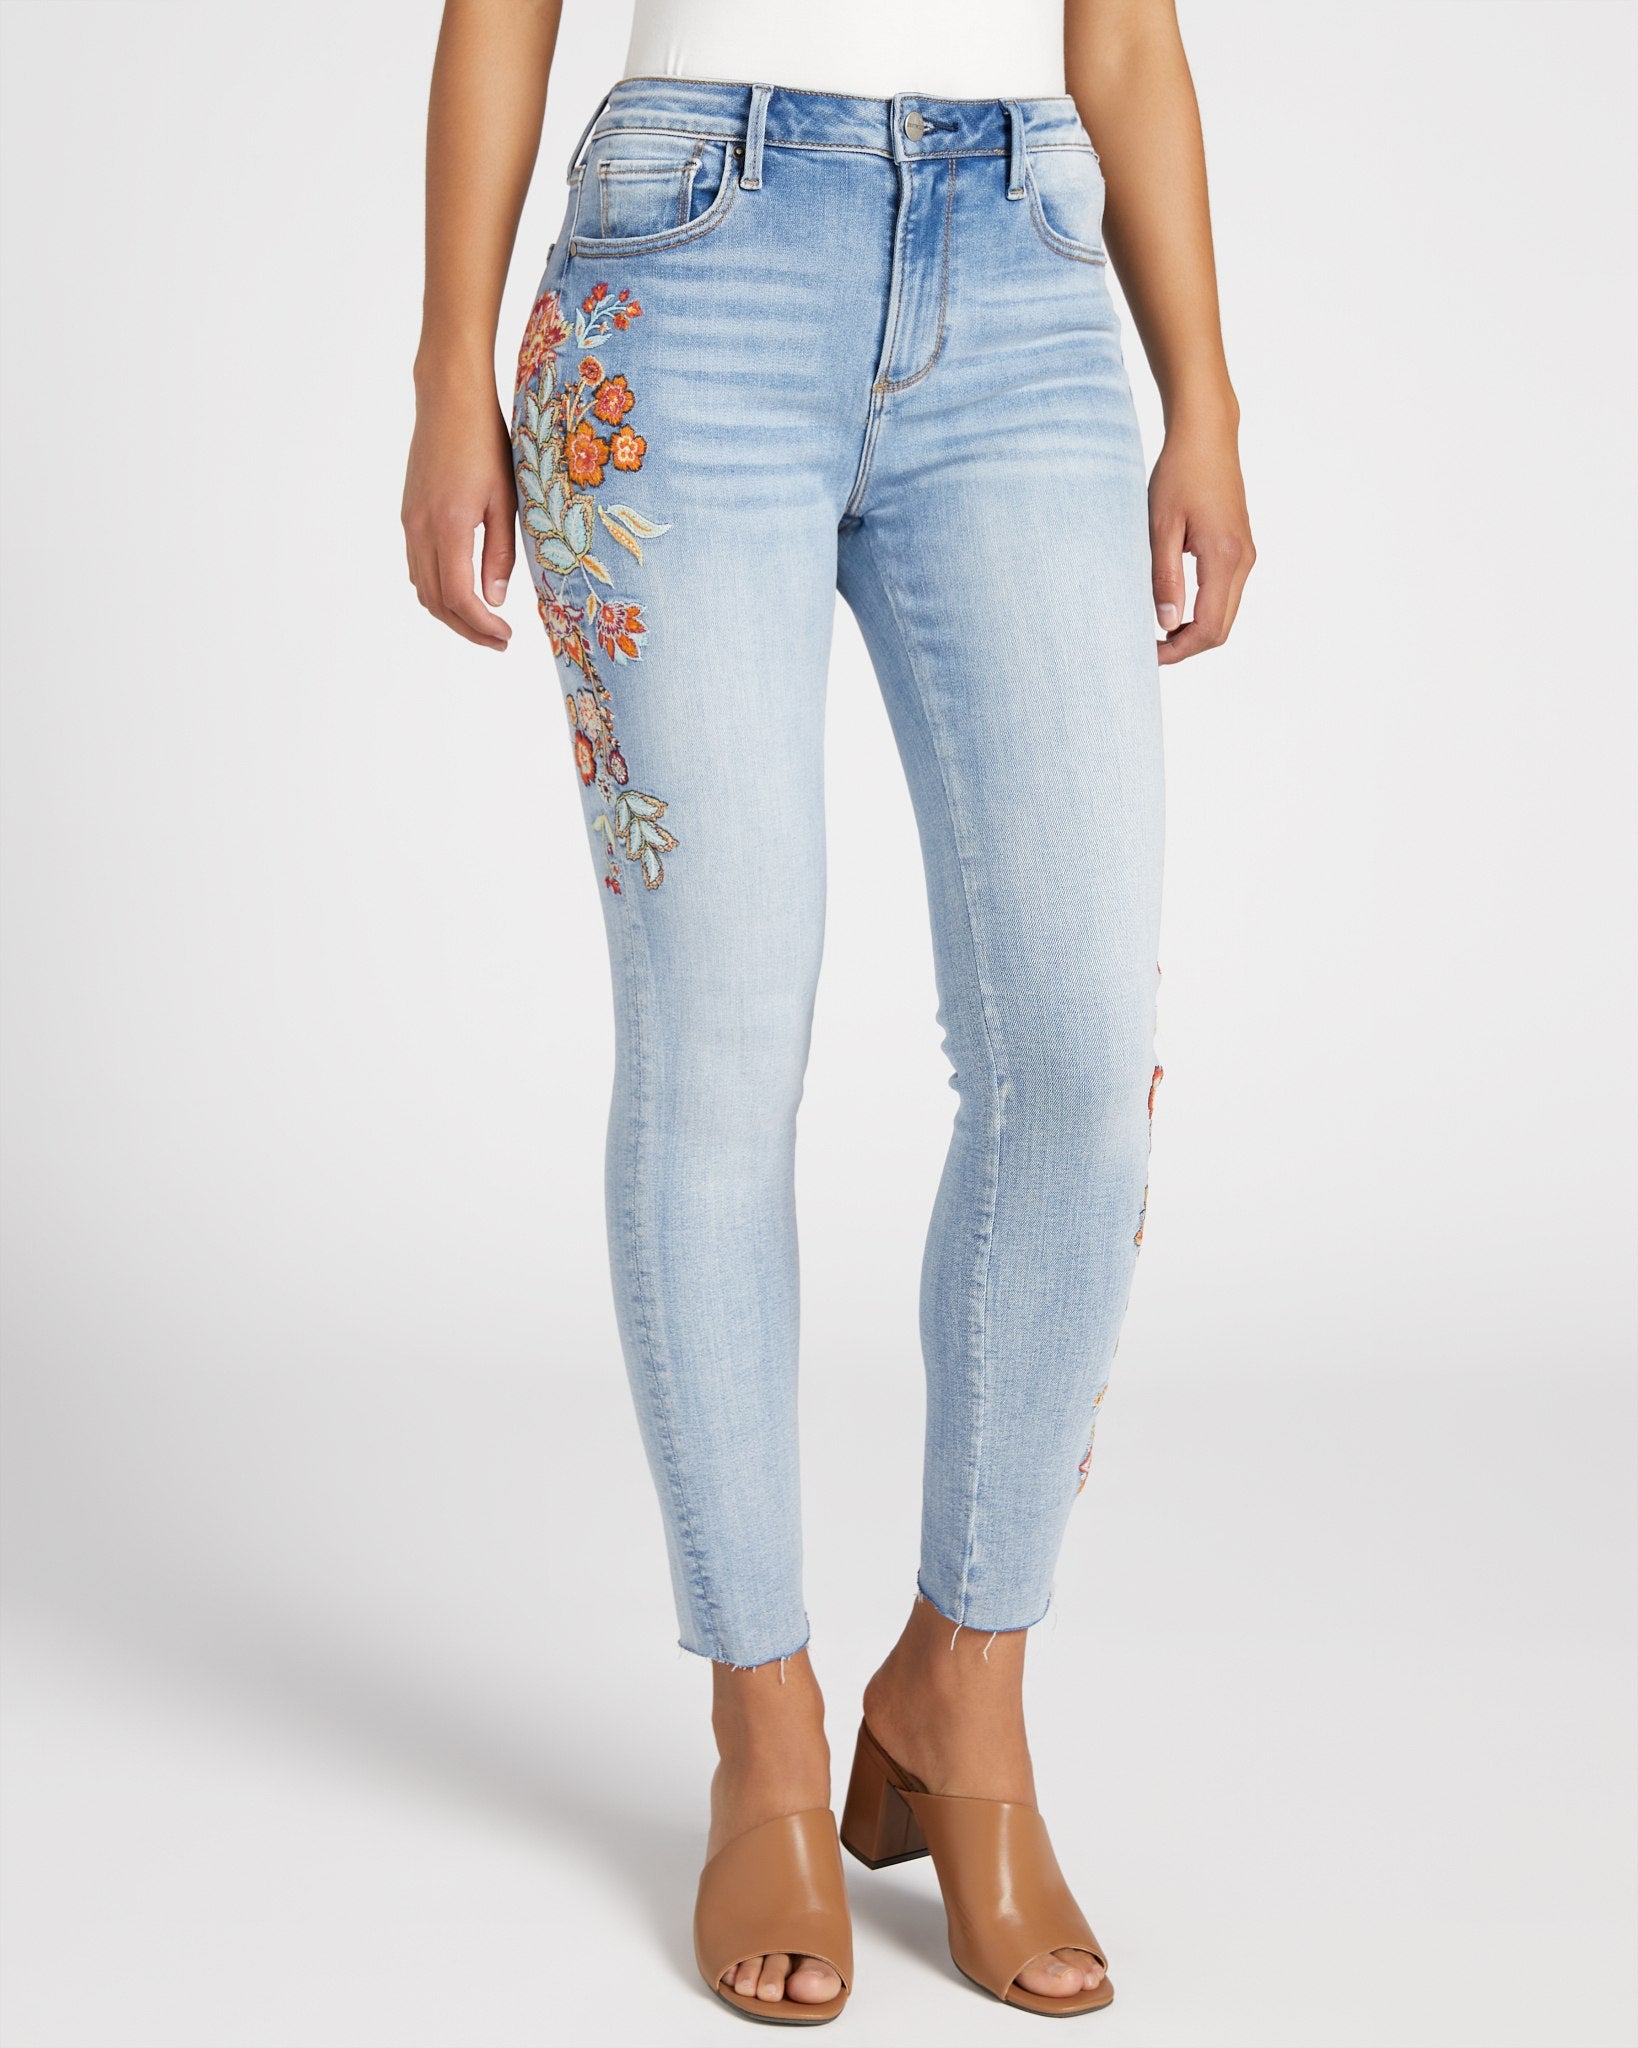 Women's Floral Embroidered Slim Leg Ankle Jeans - Medium Wash - 4